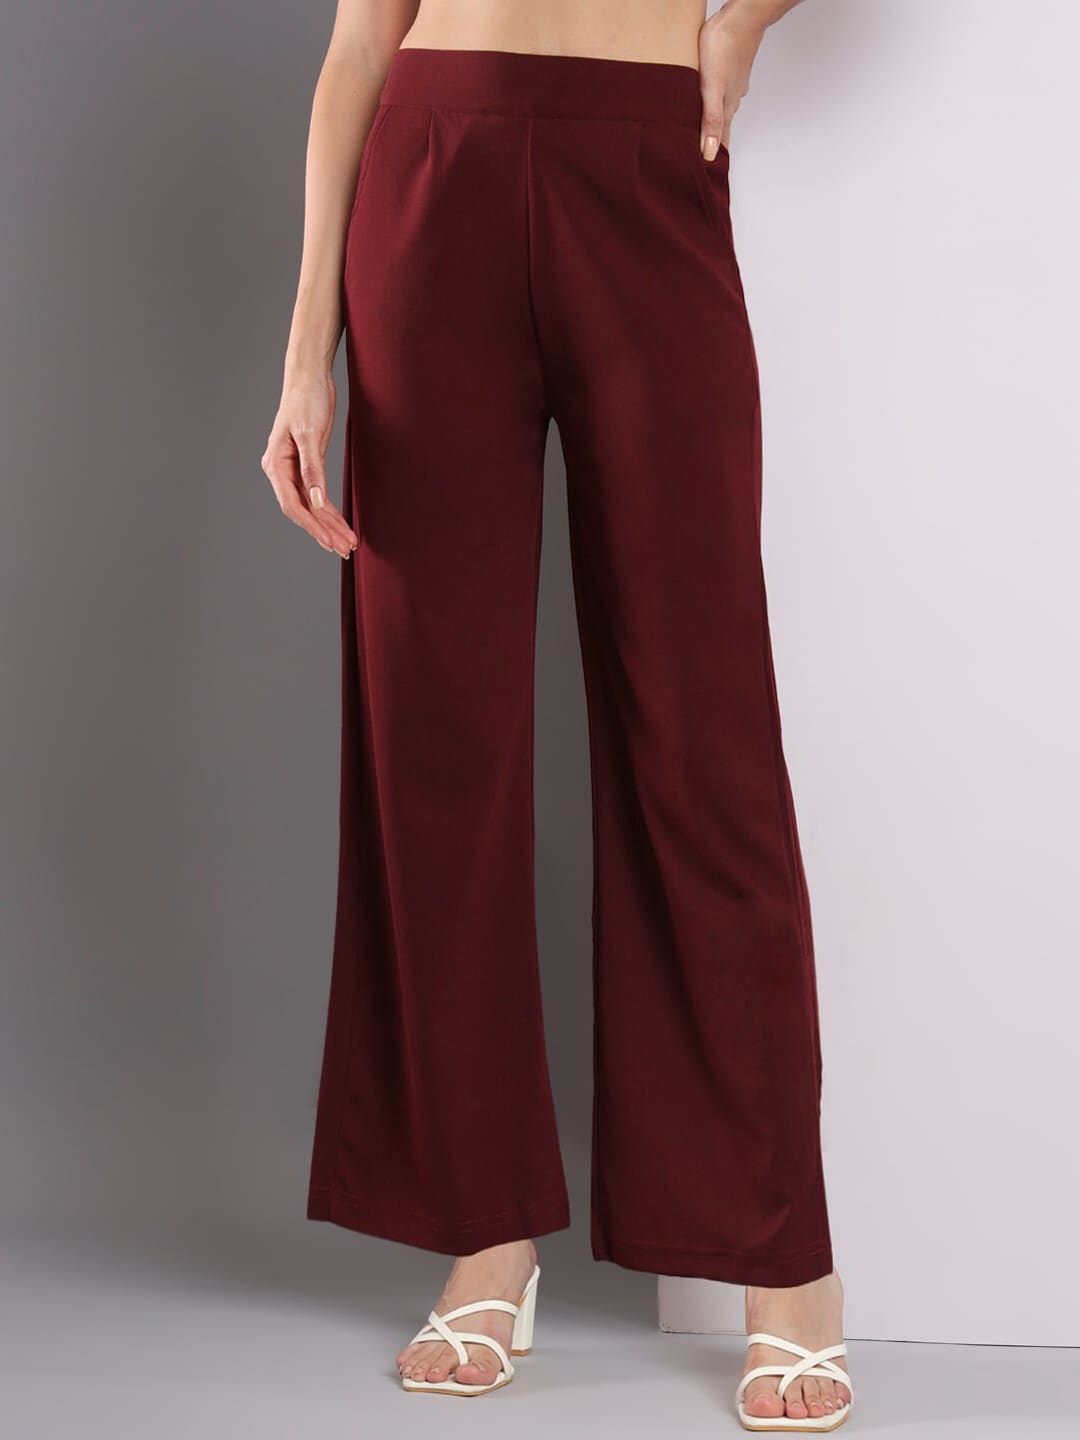 Q-rious Women Mid Rise Plain Parallel Trousers Price in India